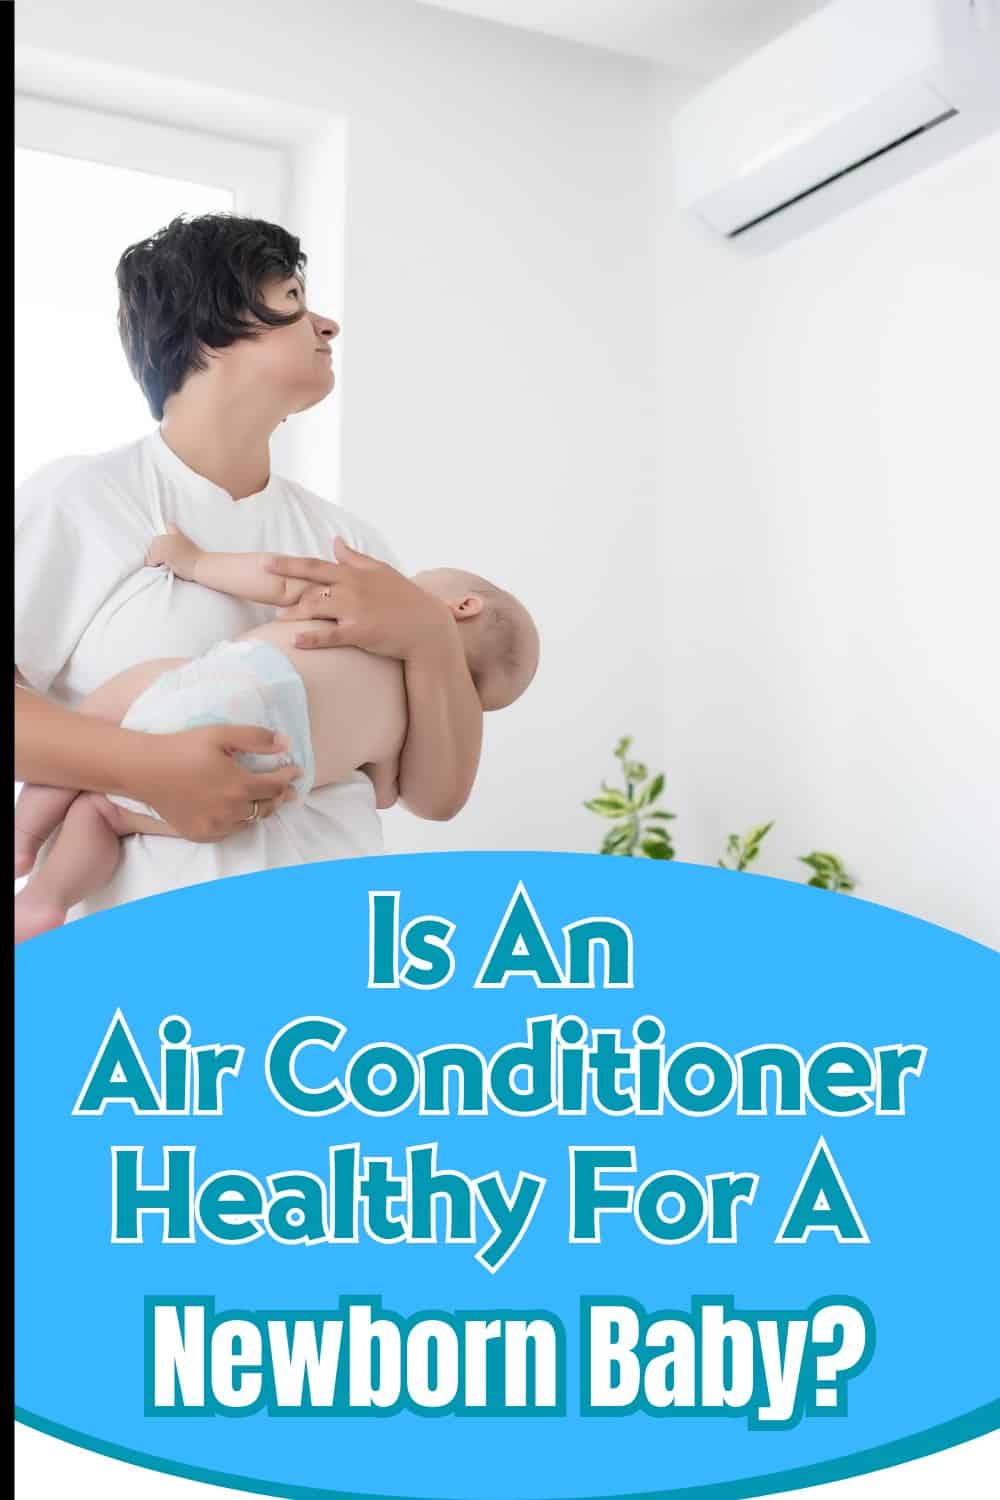 Yes air conditioning is safe to use with a newborn baby